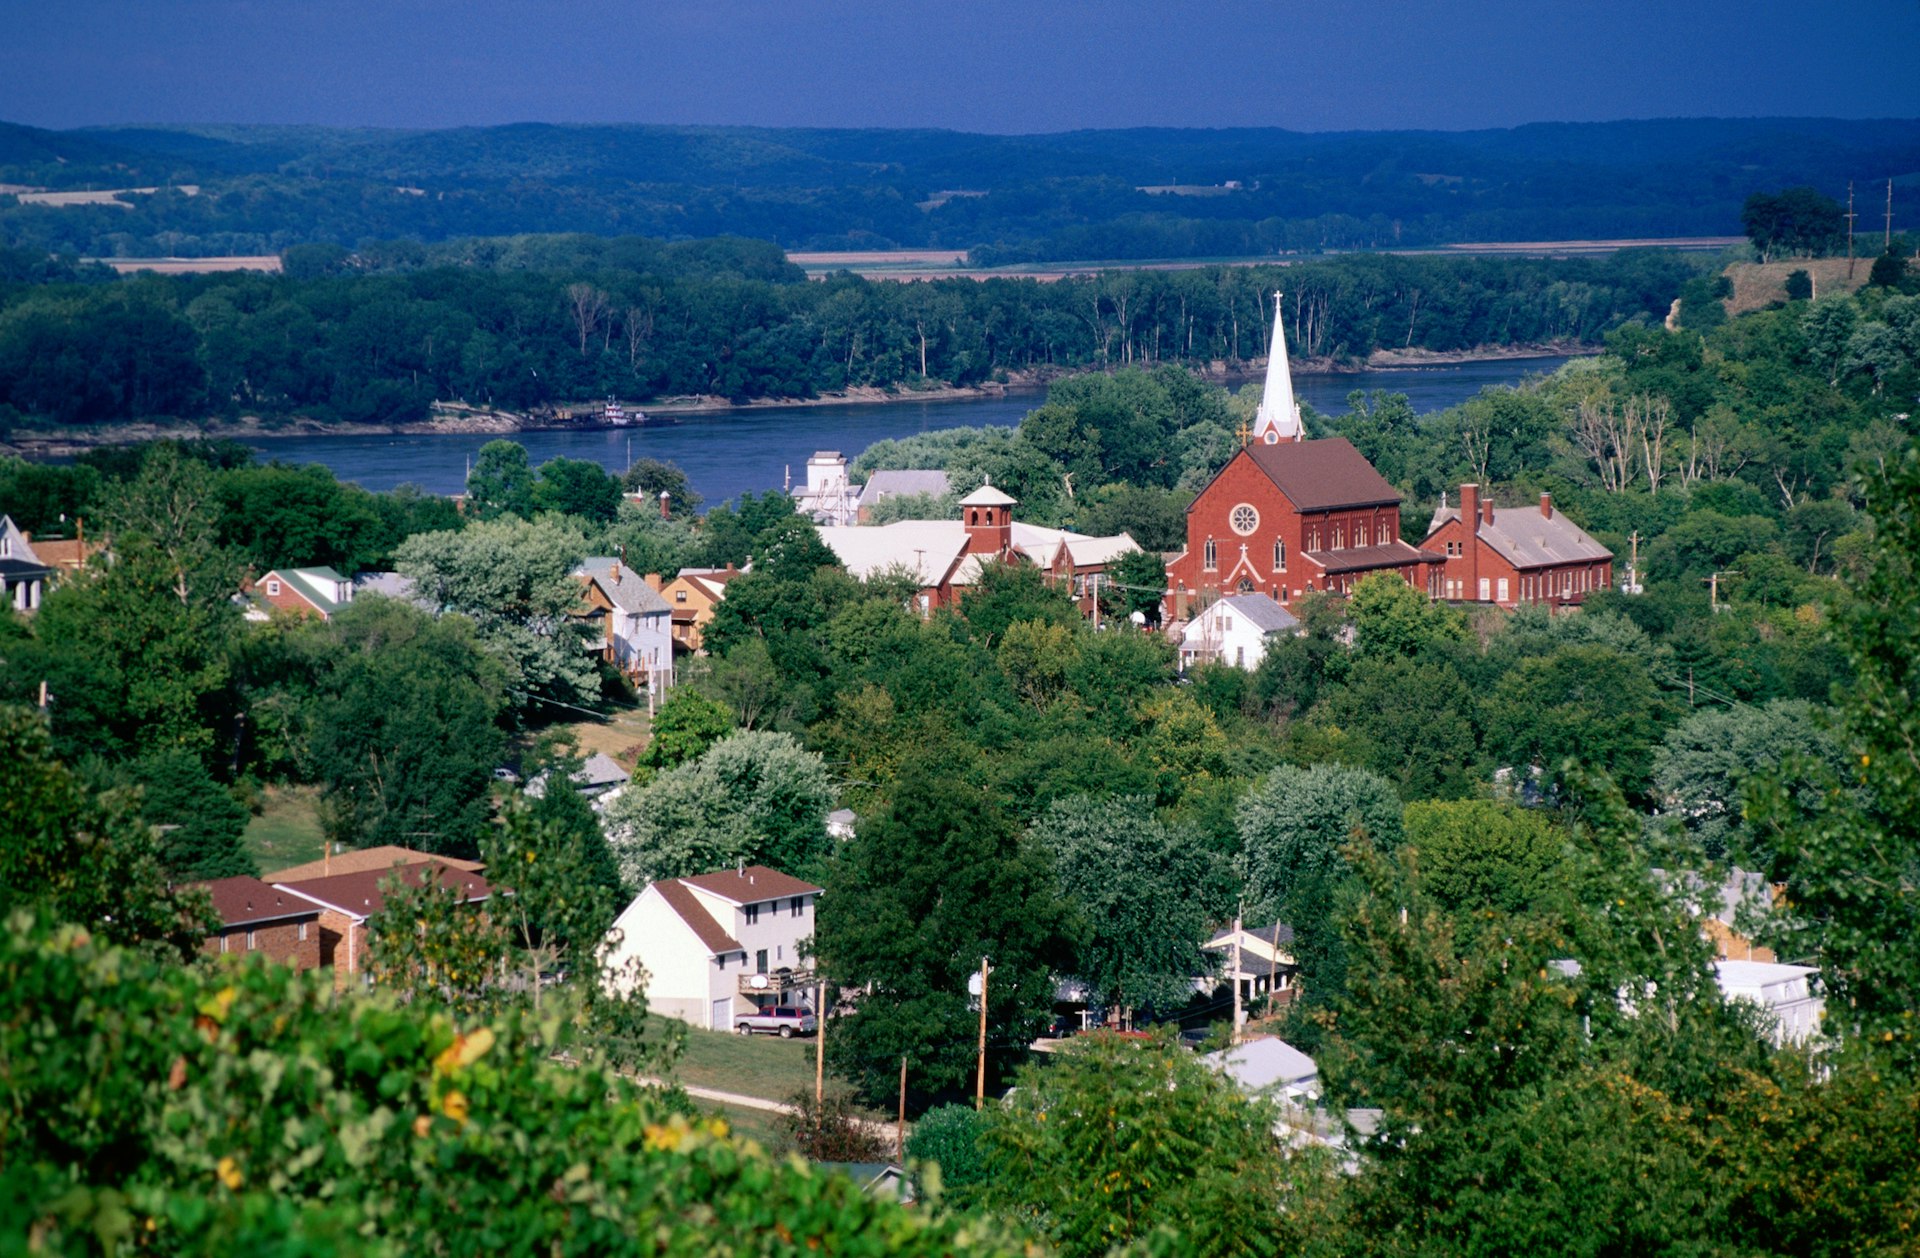 A town with a small red church with a pointed steeple next to a river